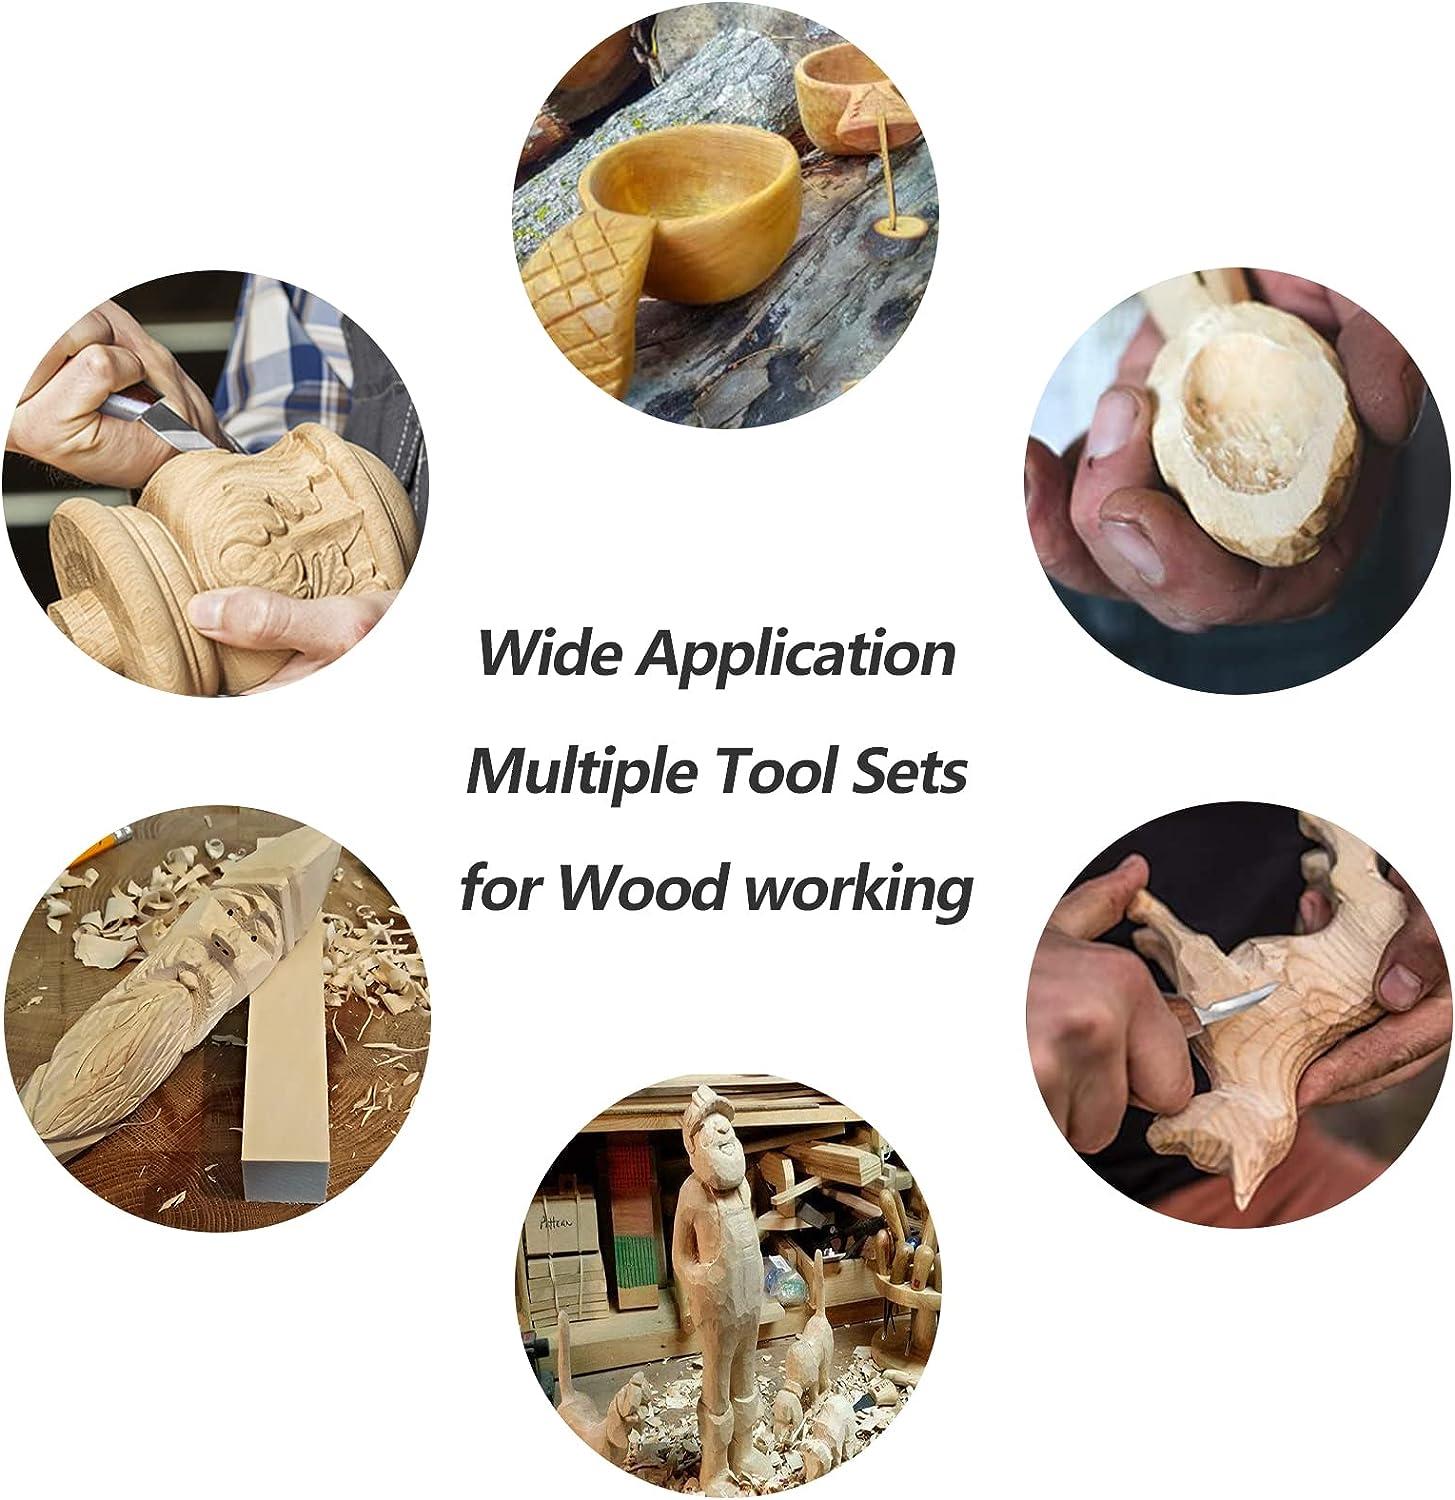 VIBRATITE Wood Carving Tools Set - Wood Carving Kit with Detail